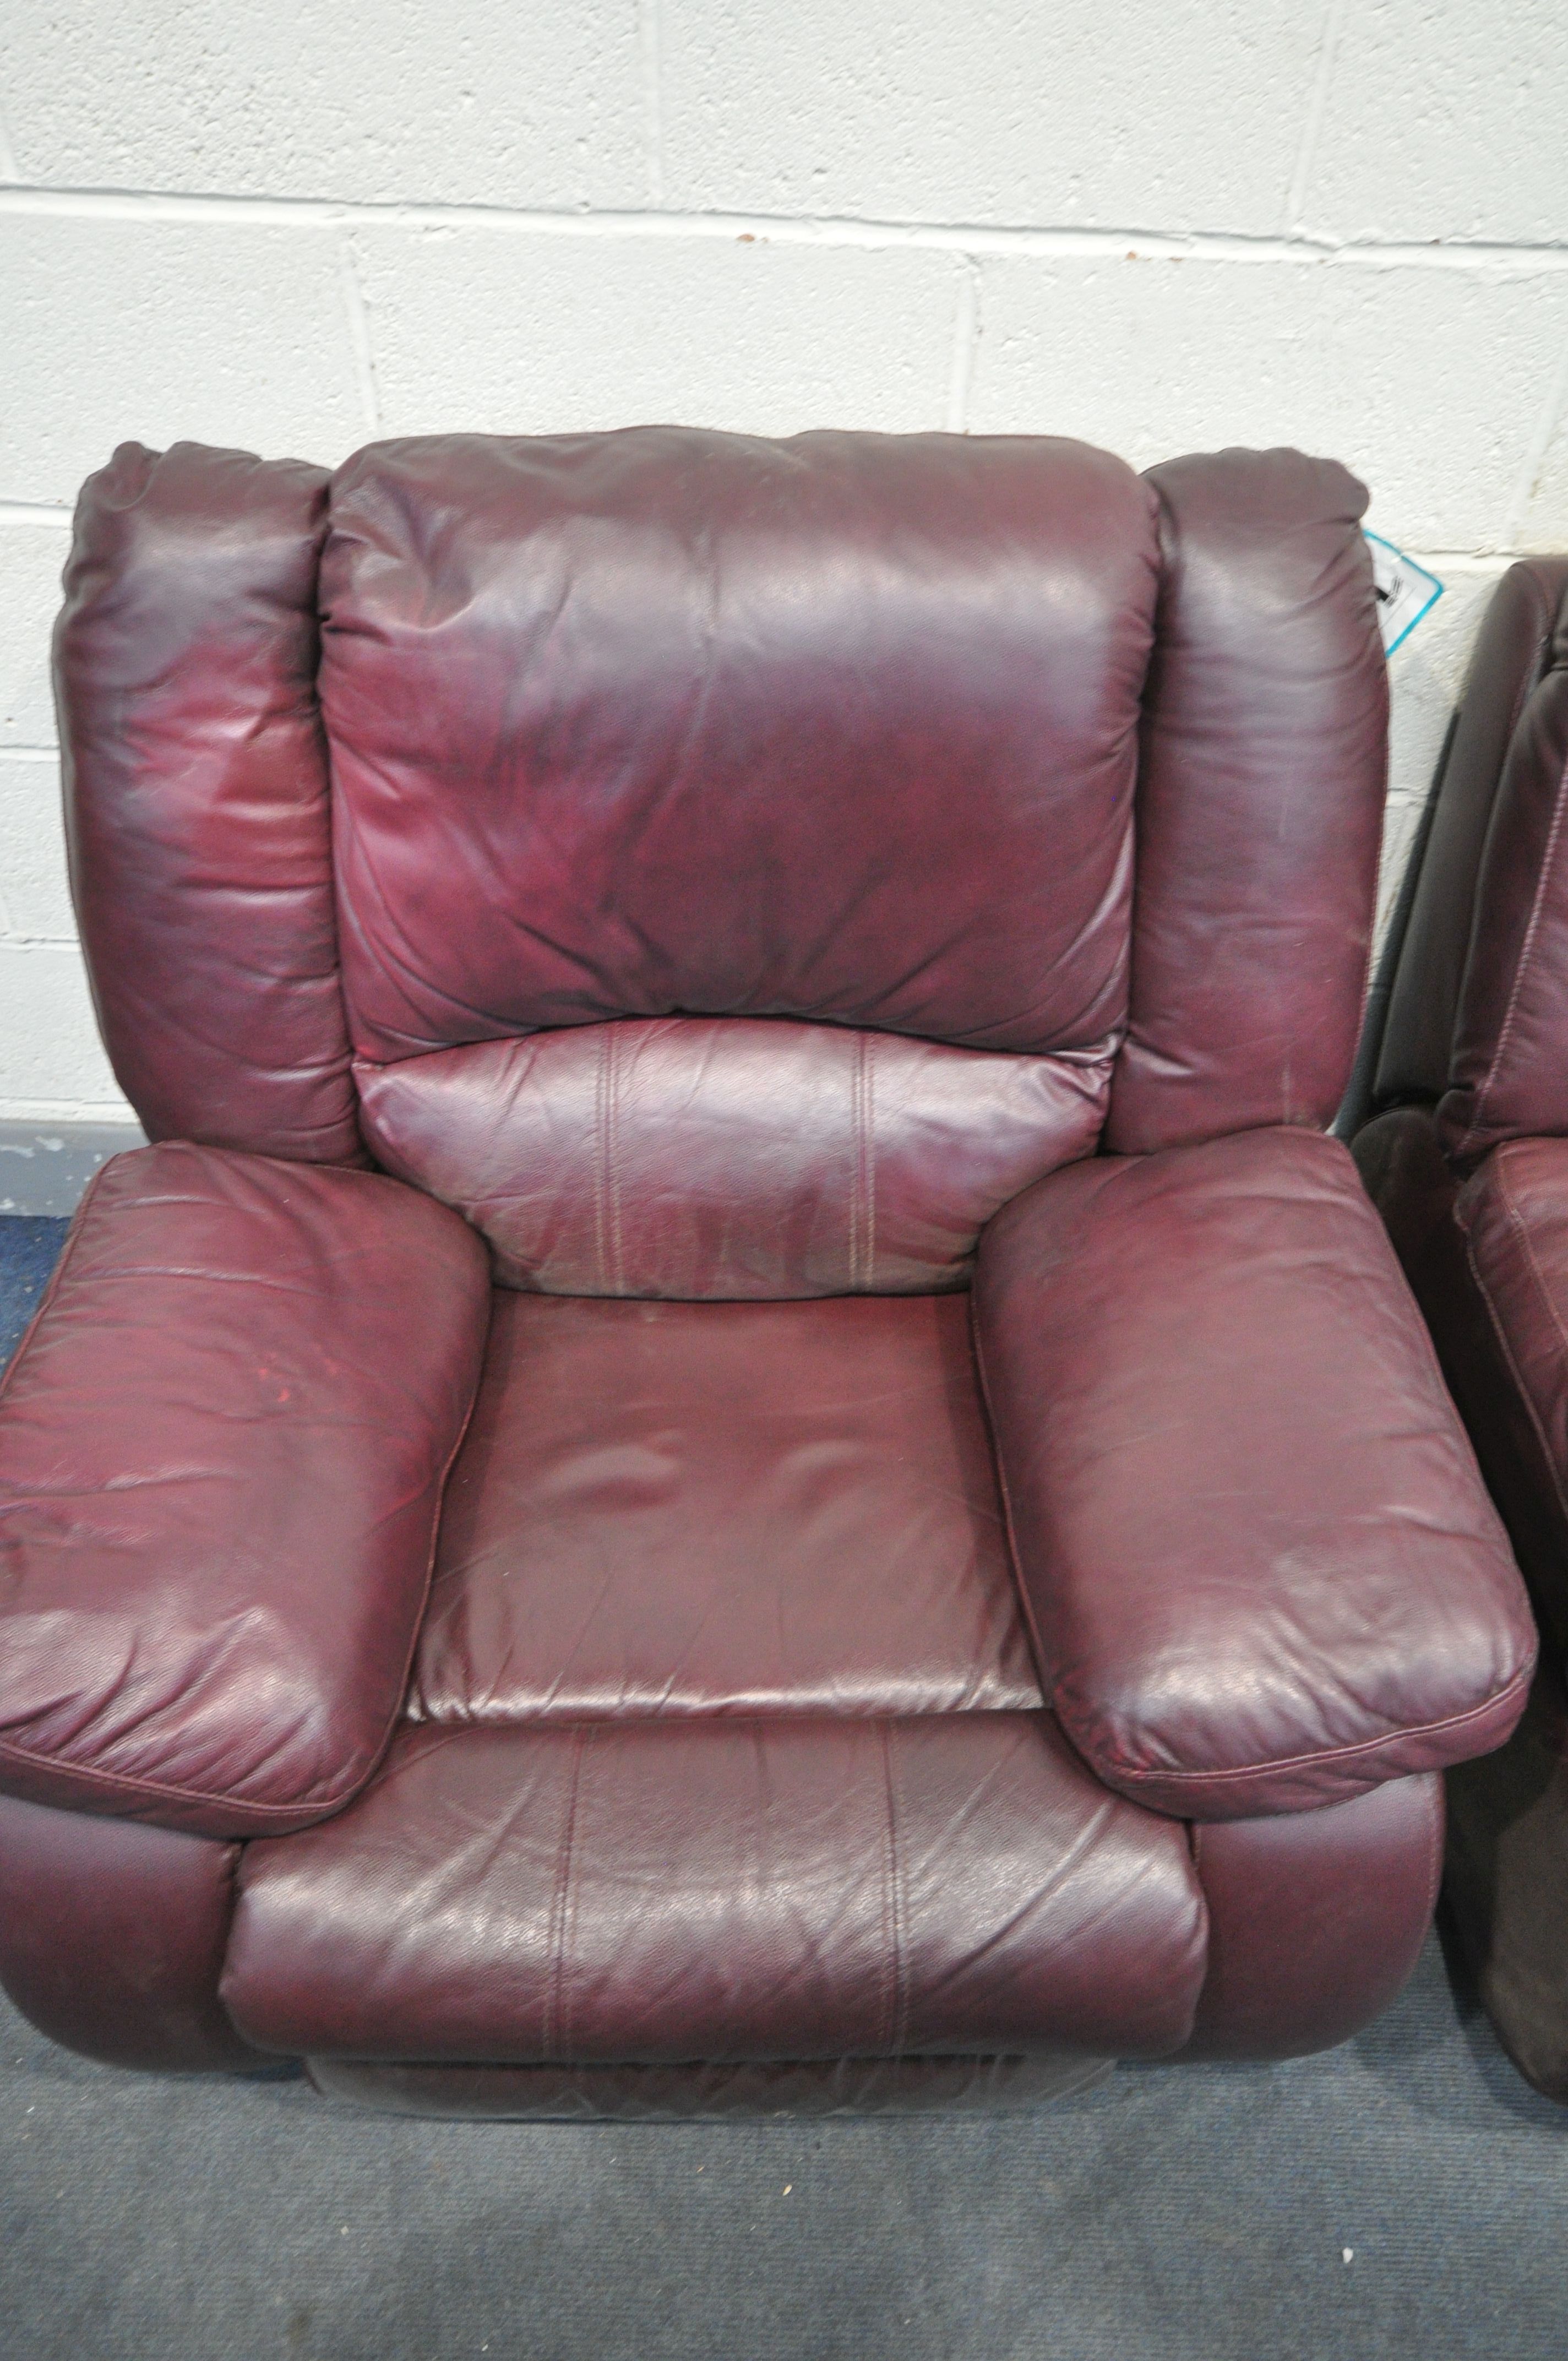 A PLUM COLORED LEATHERETTE THREE SEATER MANUAL RECLINING CHAIR, along with a matching rocking - Image 3 of 3